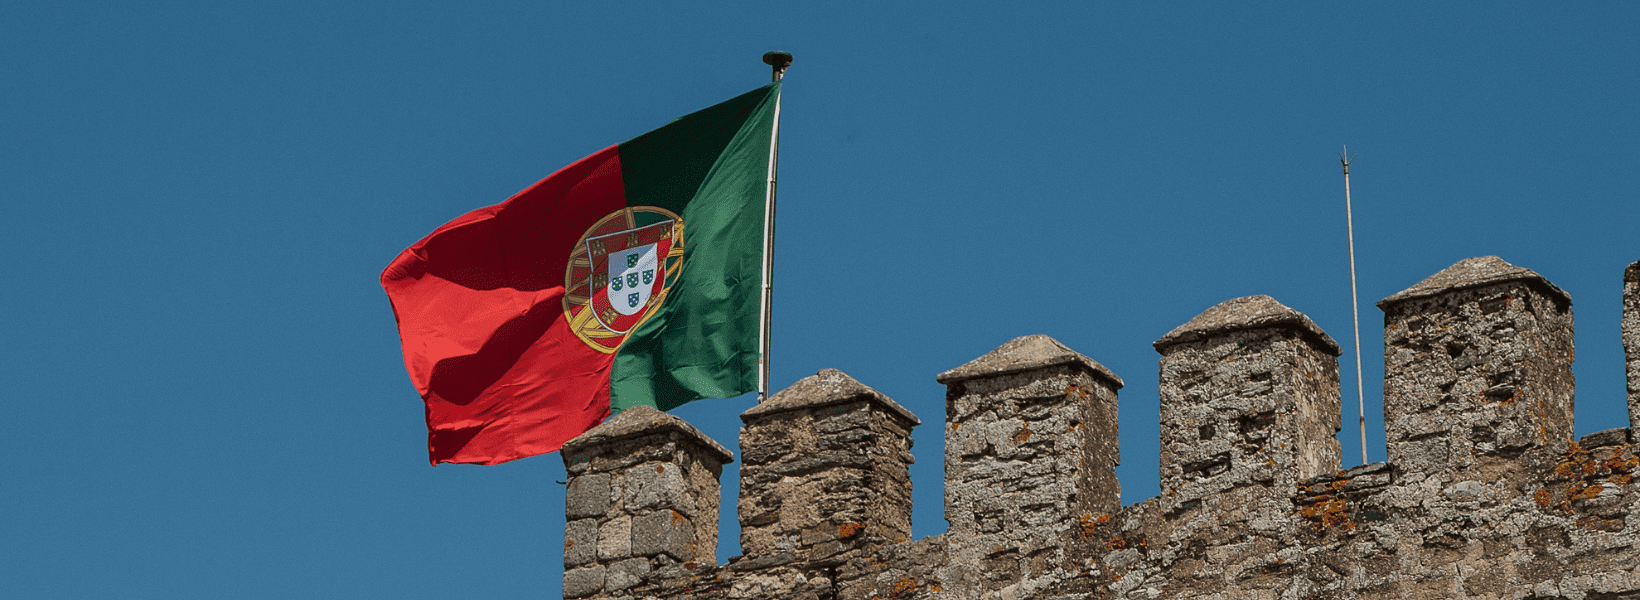 A brief history of Portugal